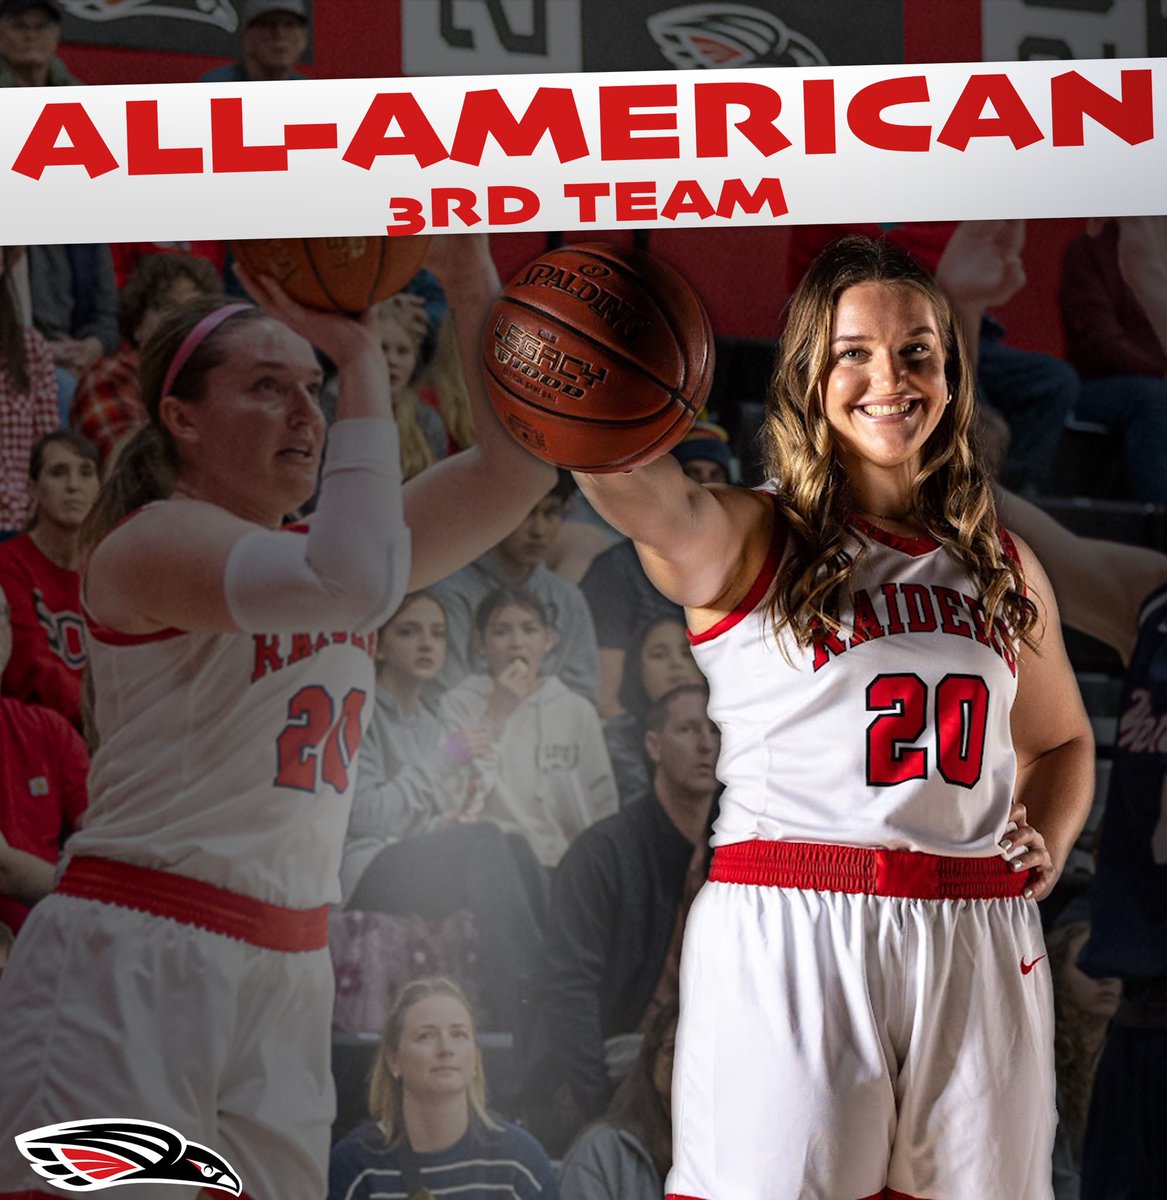 Congratulations to our 3 Time All American @kami_walk!! So well deserved and so proud of you! 👏🔴⚫️